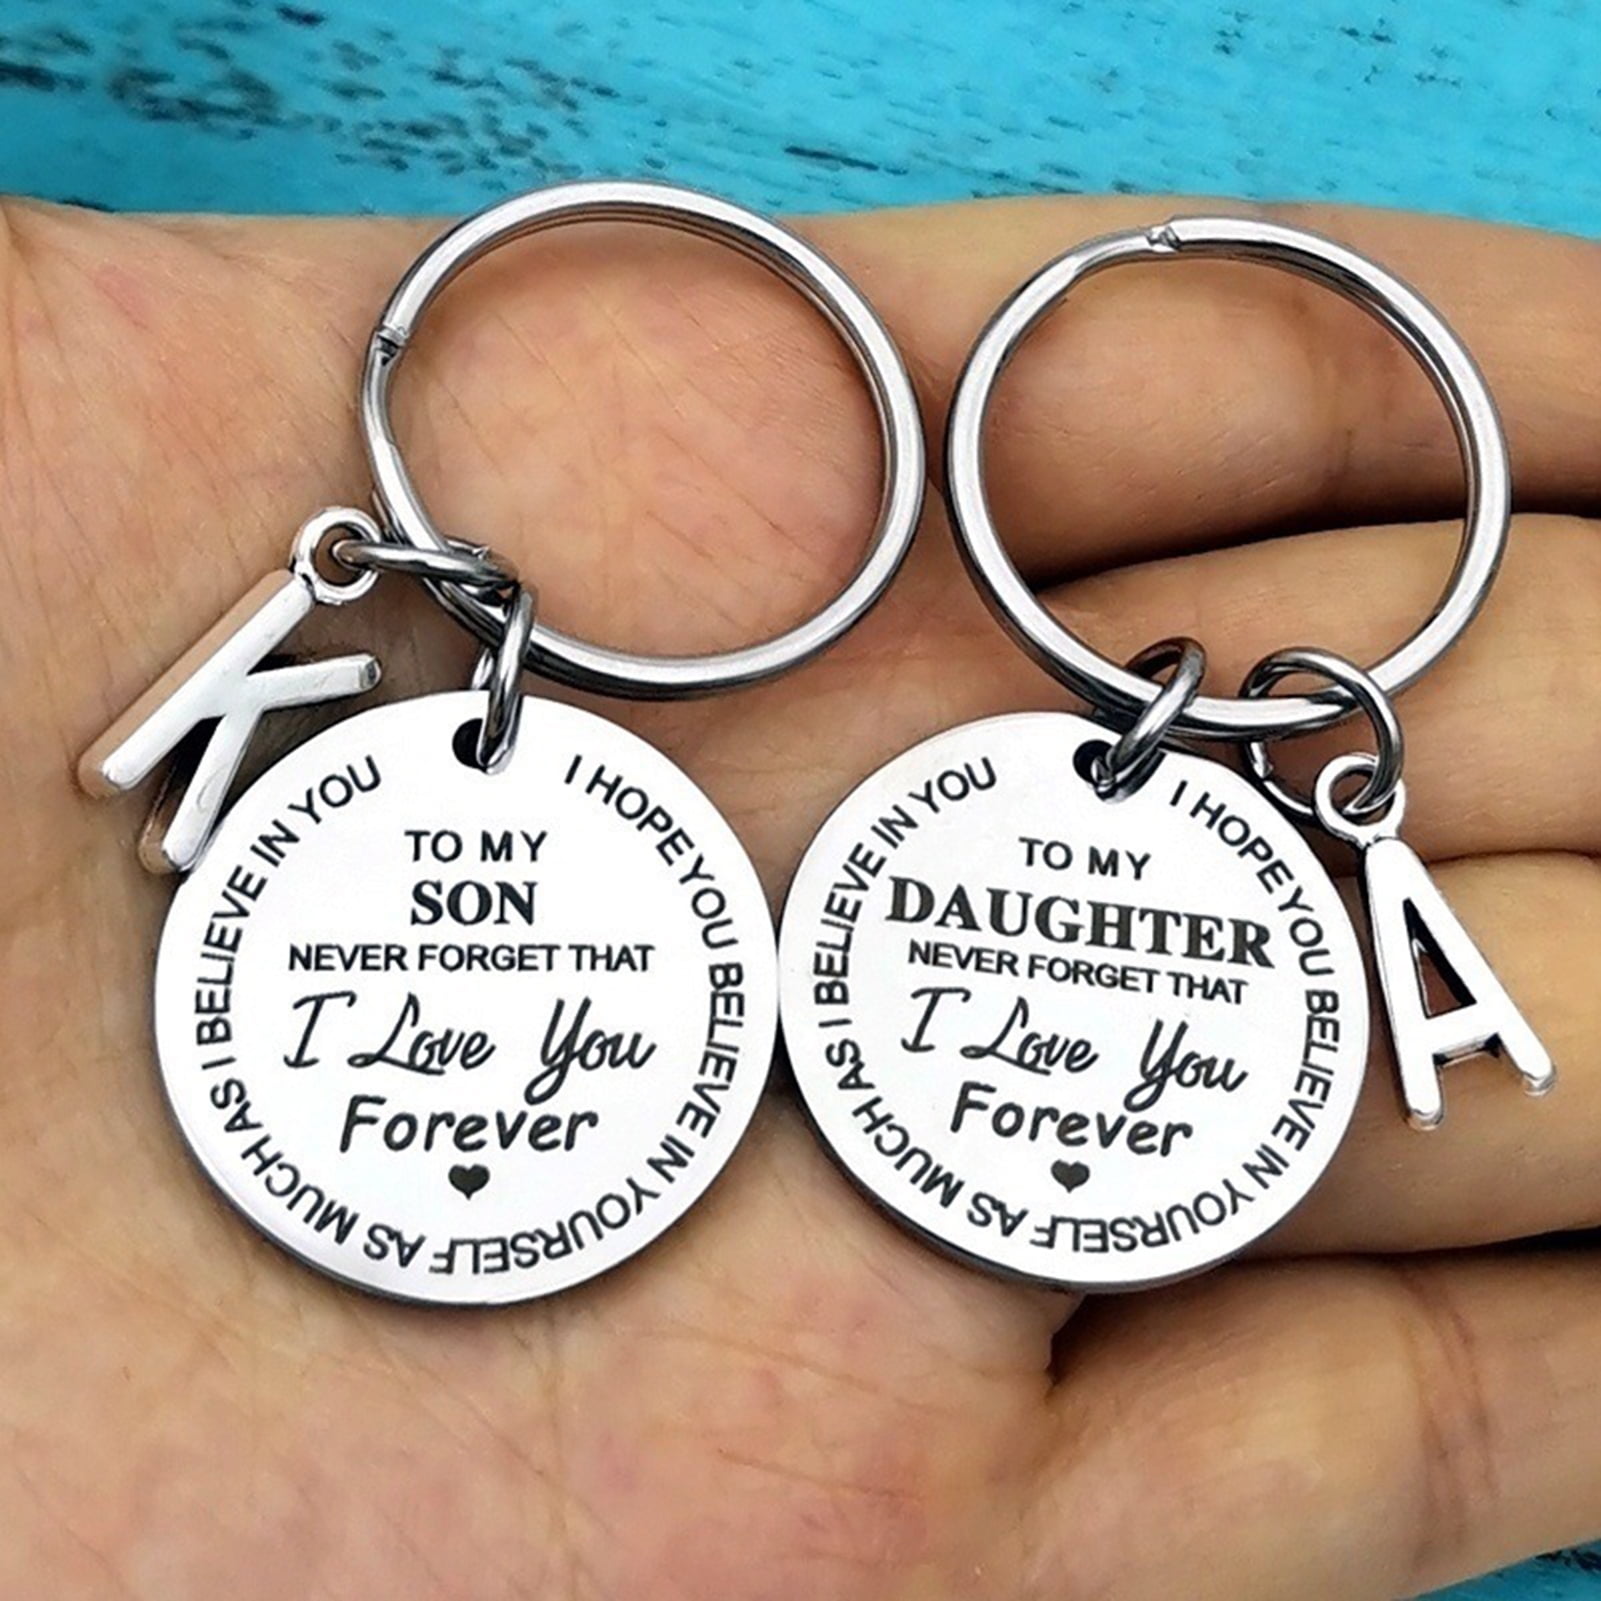 Yesbay Key Chain Eco-friendly English Letter Printed Stainless Steel DIY  Car Keyring Accessories for Gift,daughter B - Walmart.com